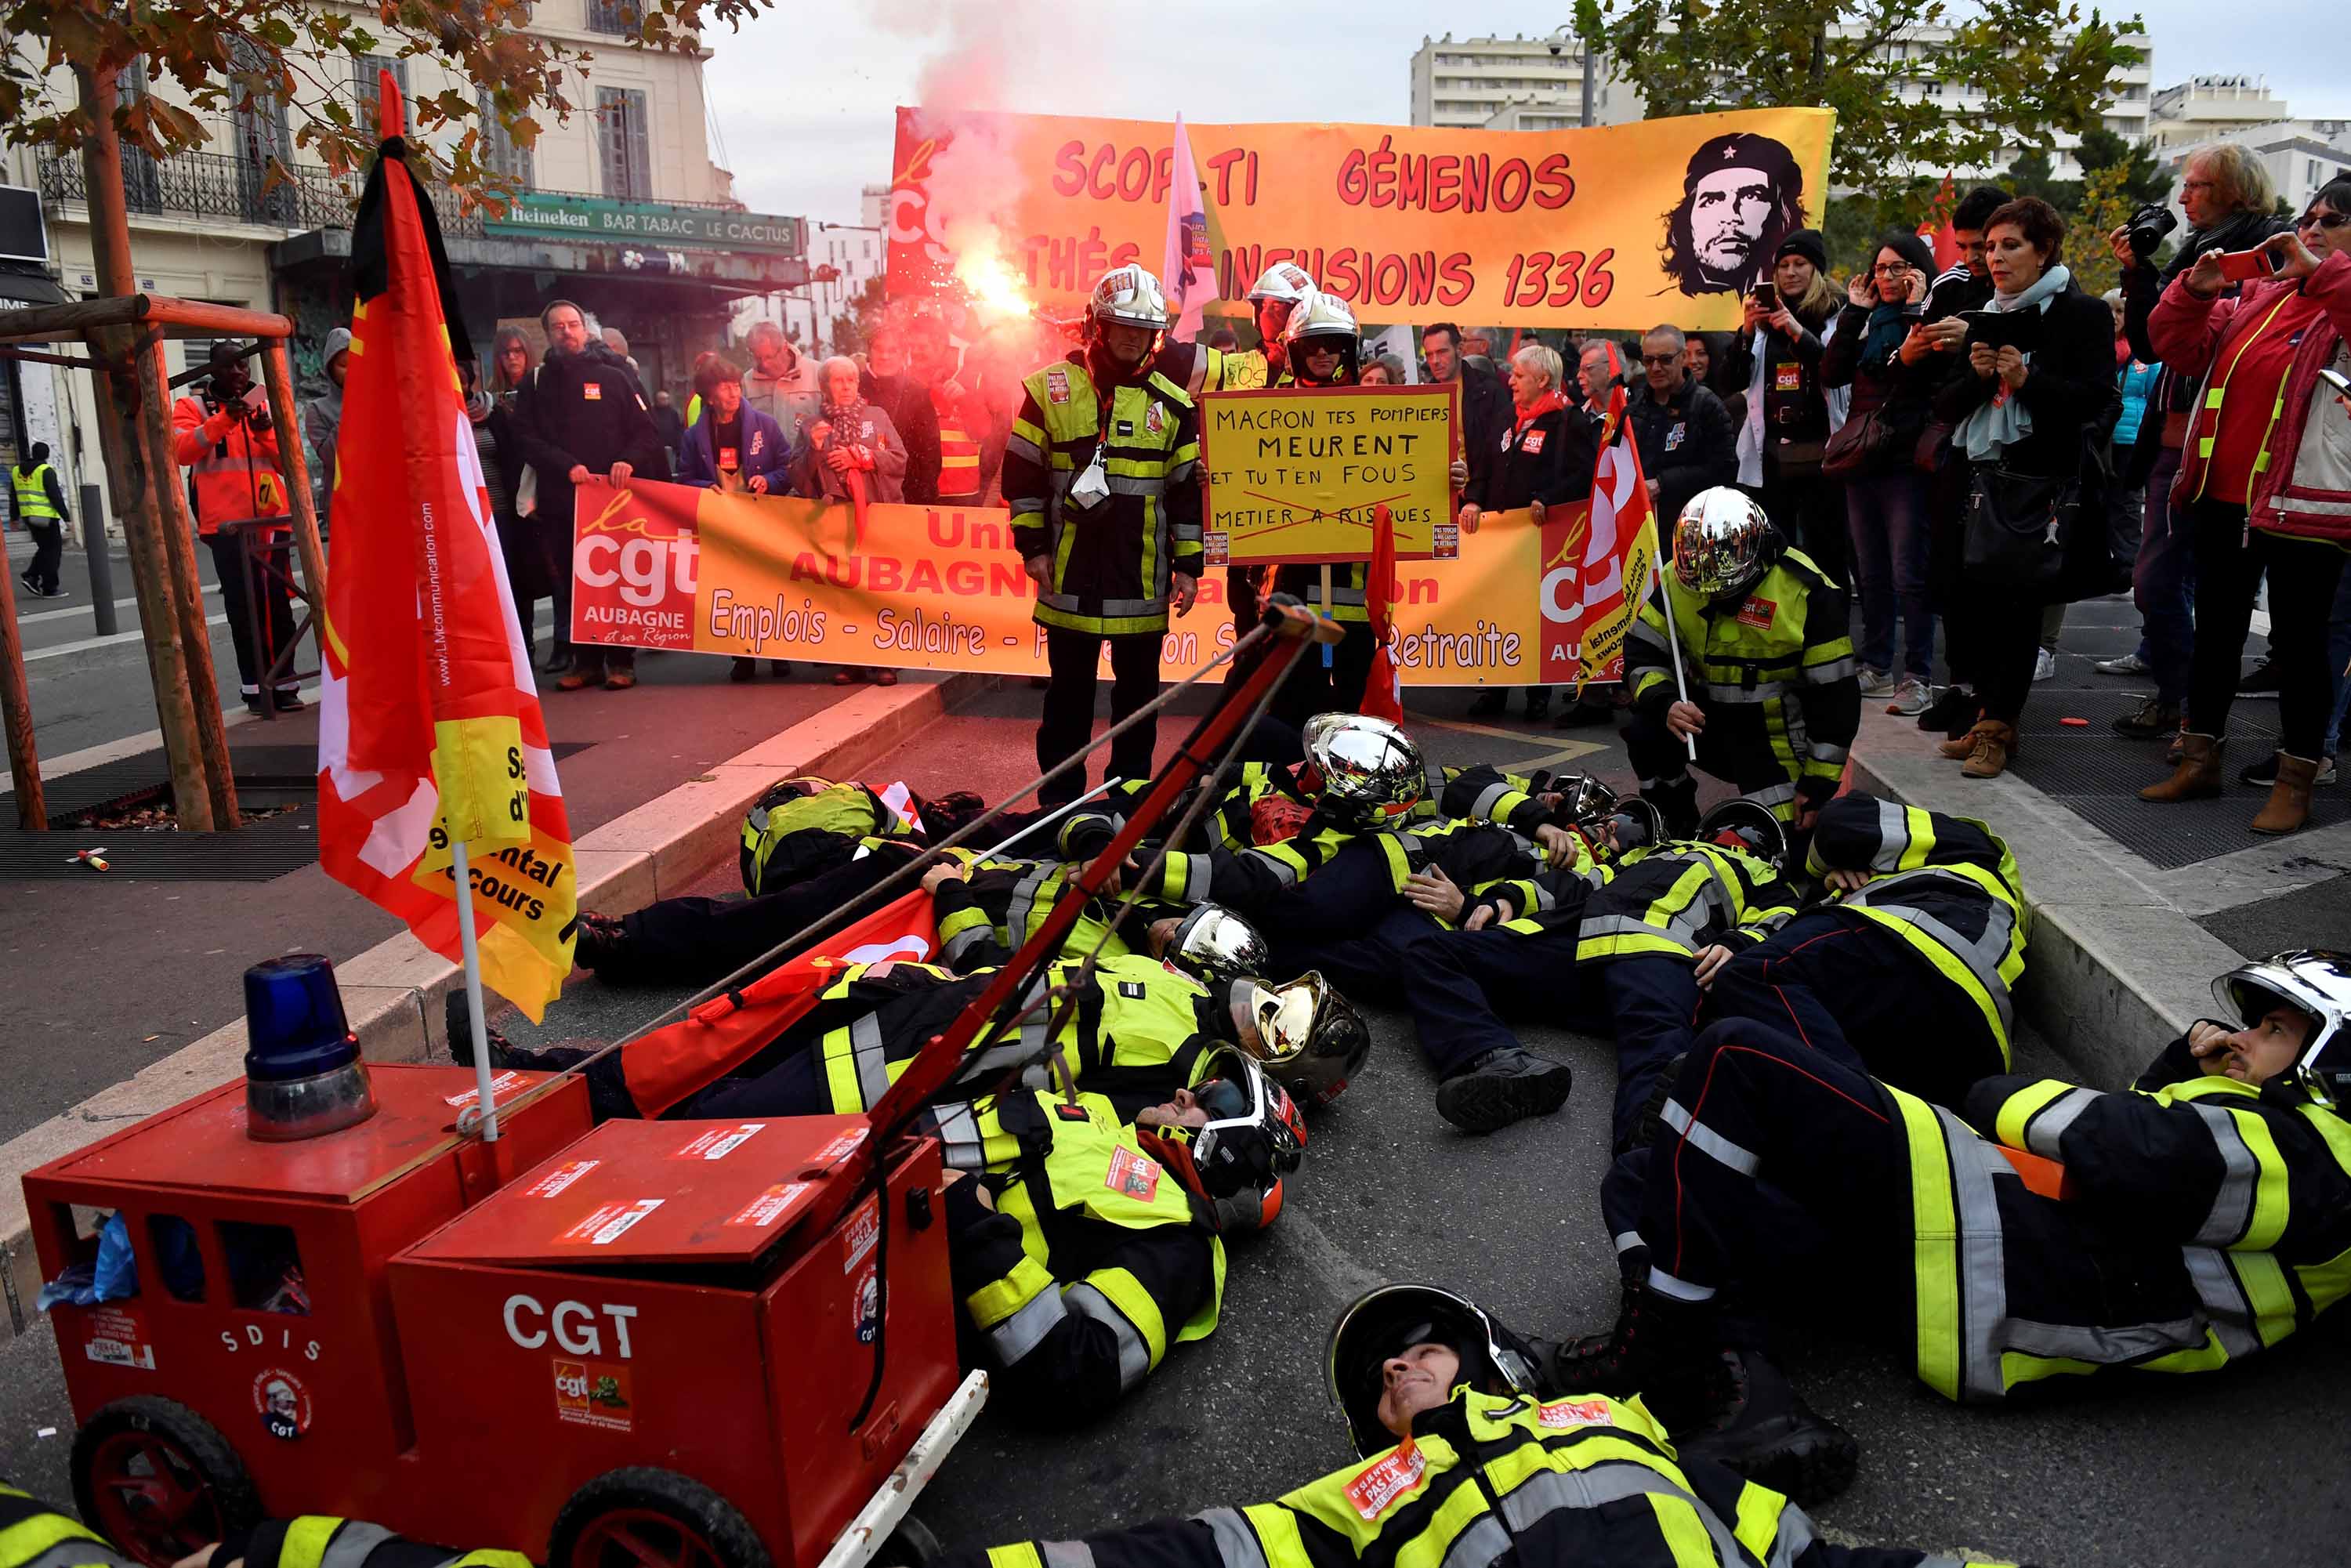 Firefighters lay on the ground as they take part in a demonstration to protest the proposed pension overhauls, in Marseille. Photo: Clement Mahoudeau/AFP via Getty Images